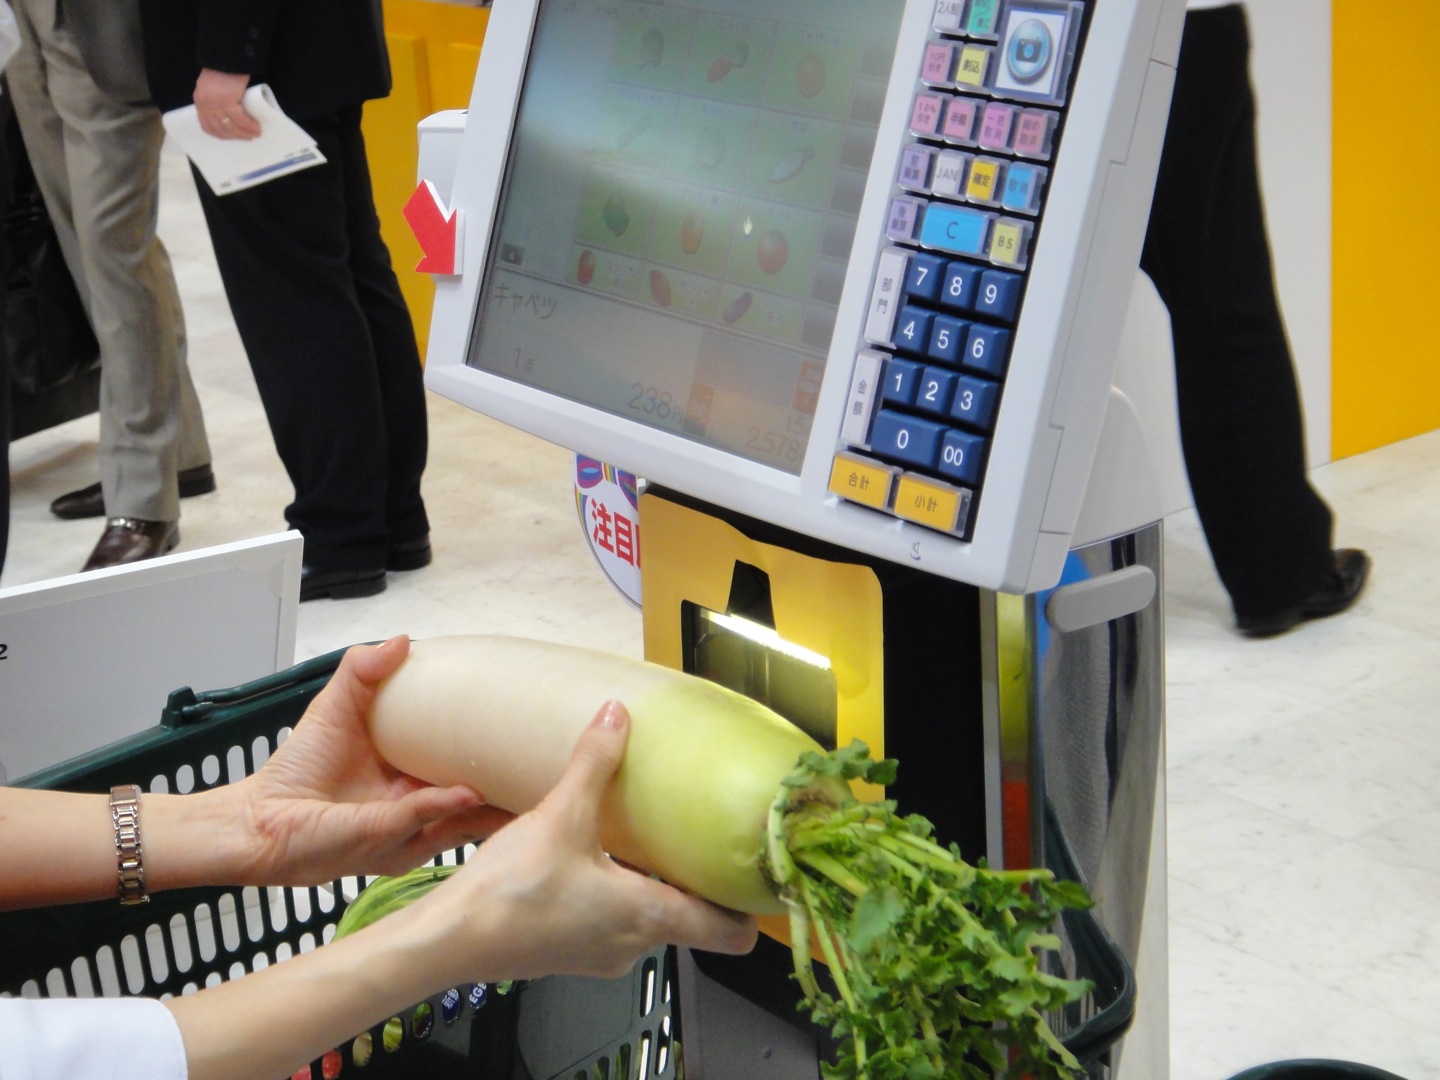 Video: Supermarket Checkout Scanner Uses Object Recognition Instead of Bar Codes